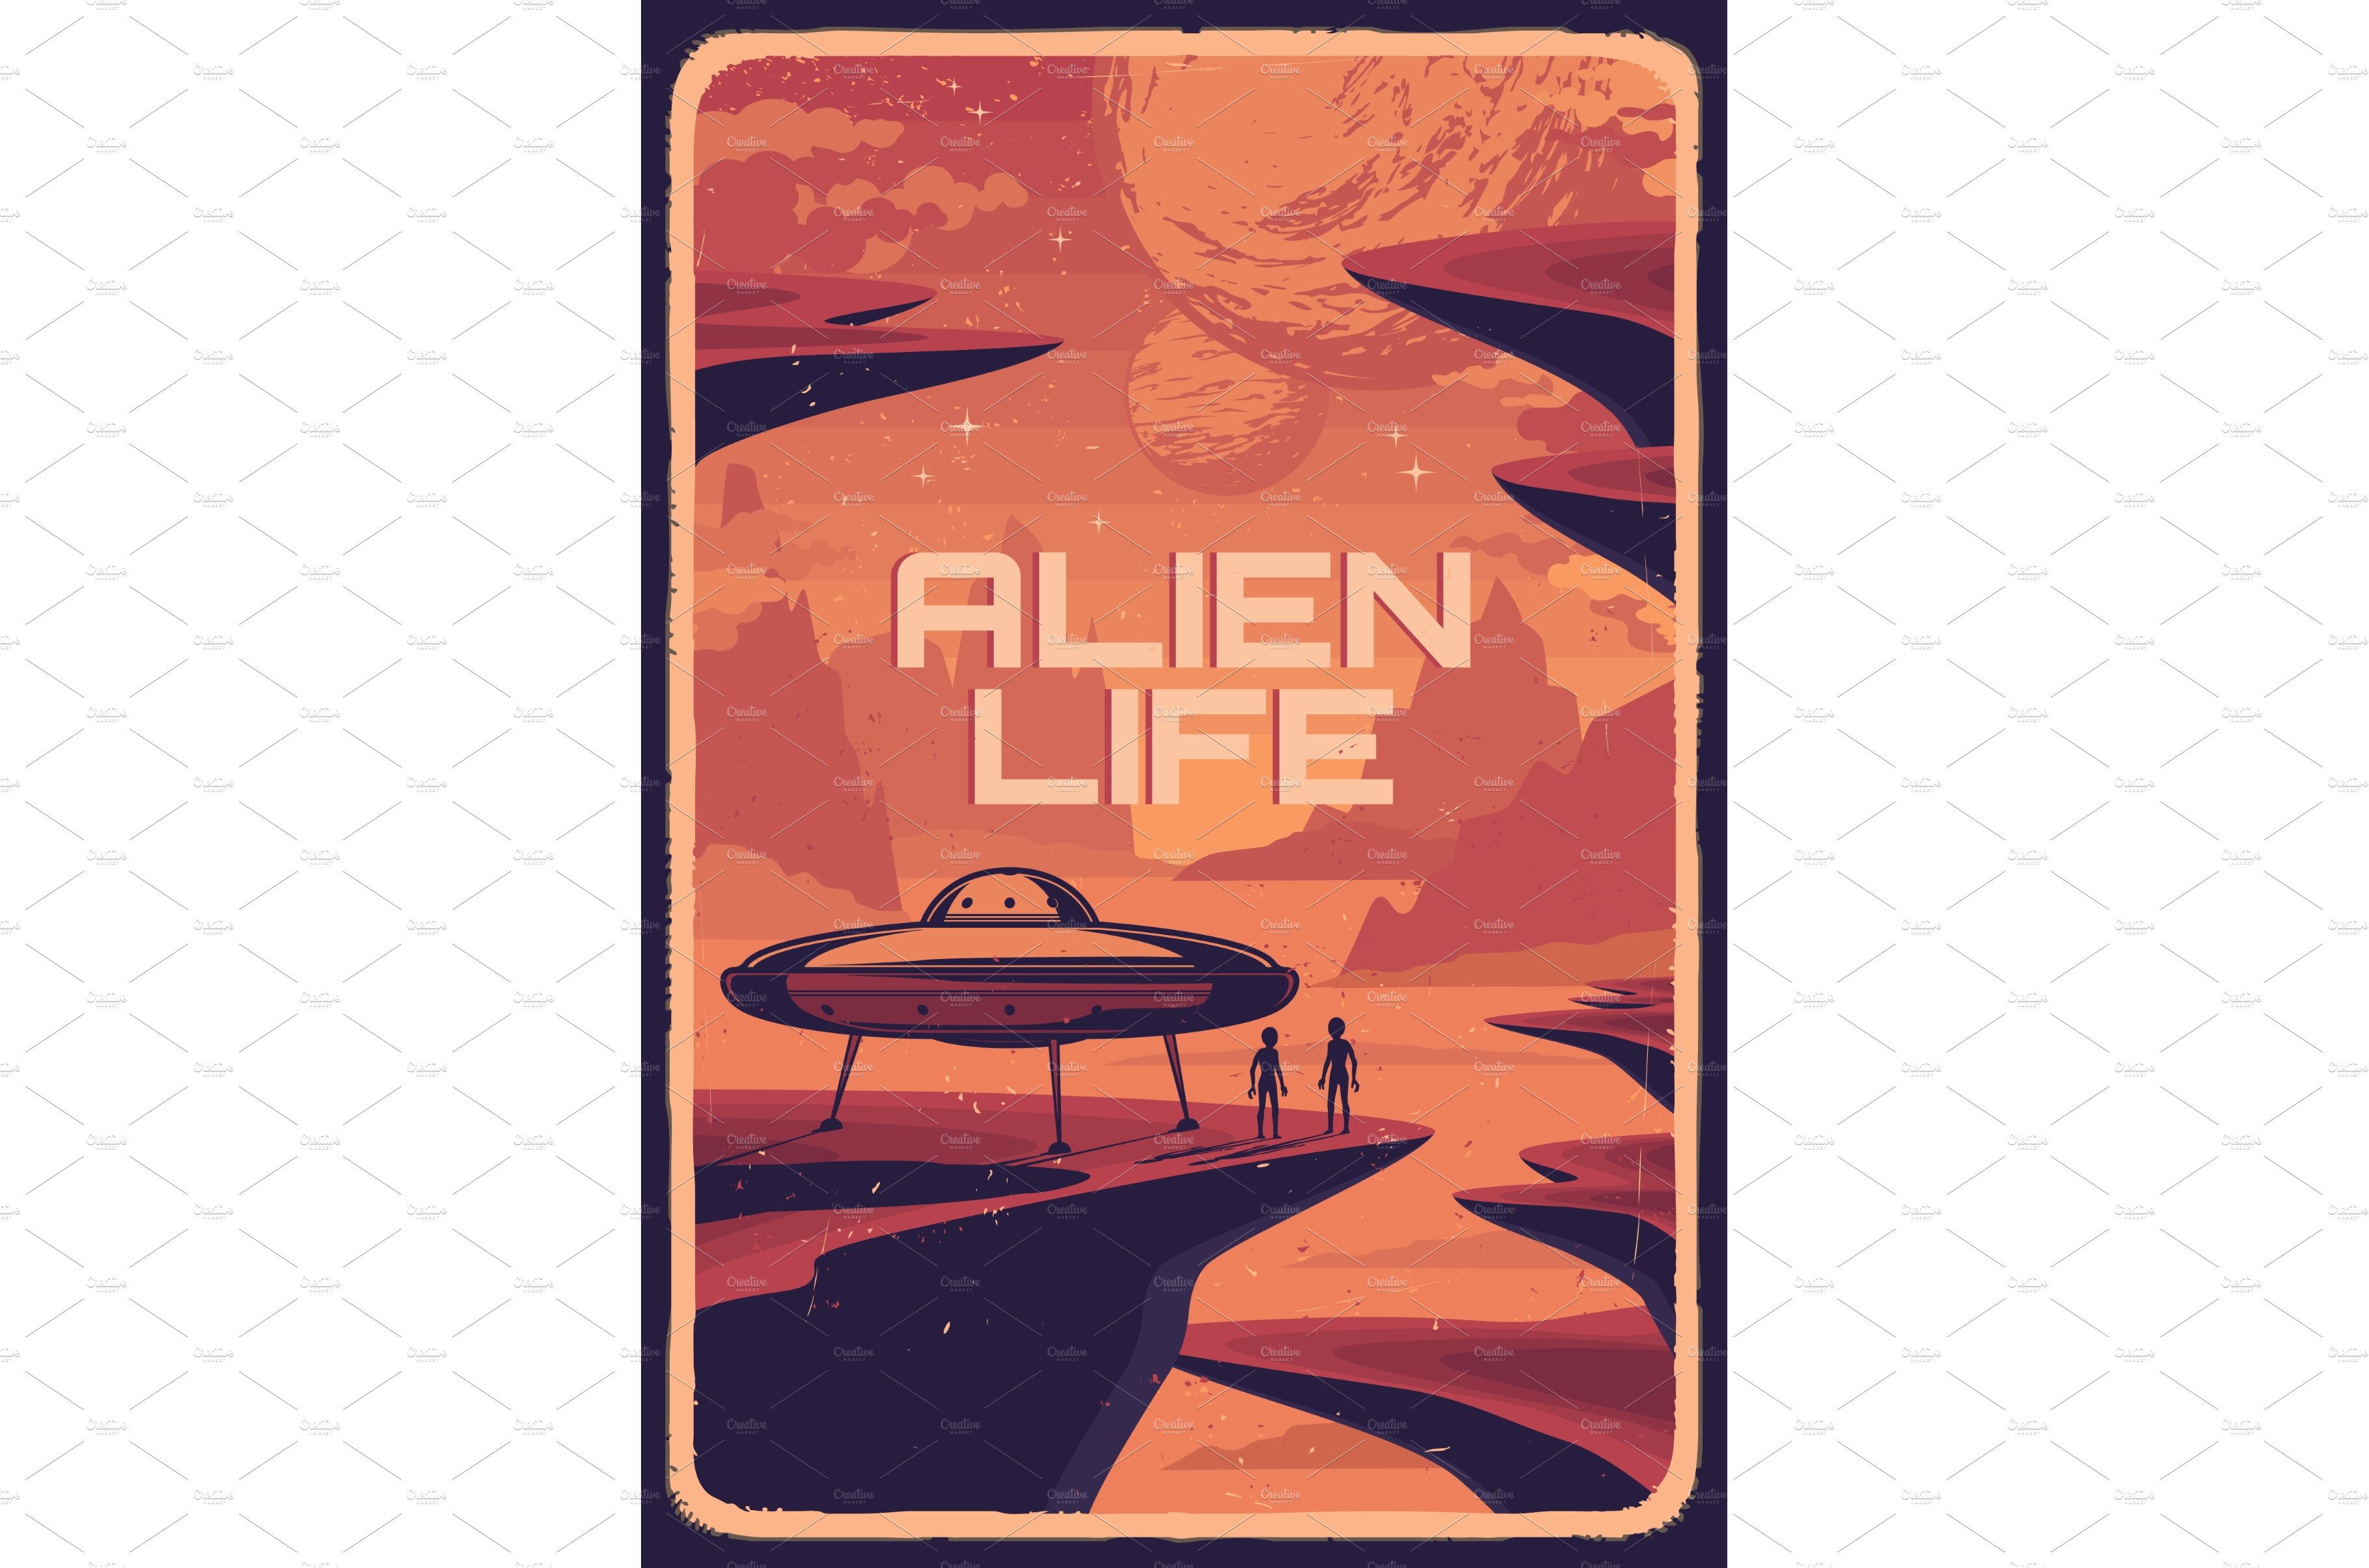 Alien life in space vintage poster cover image.